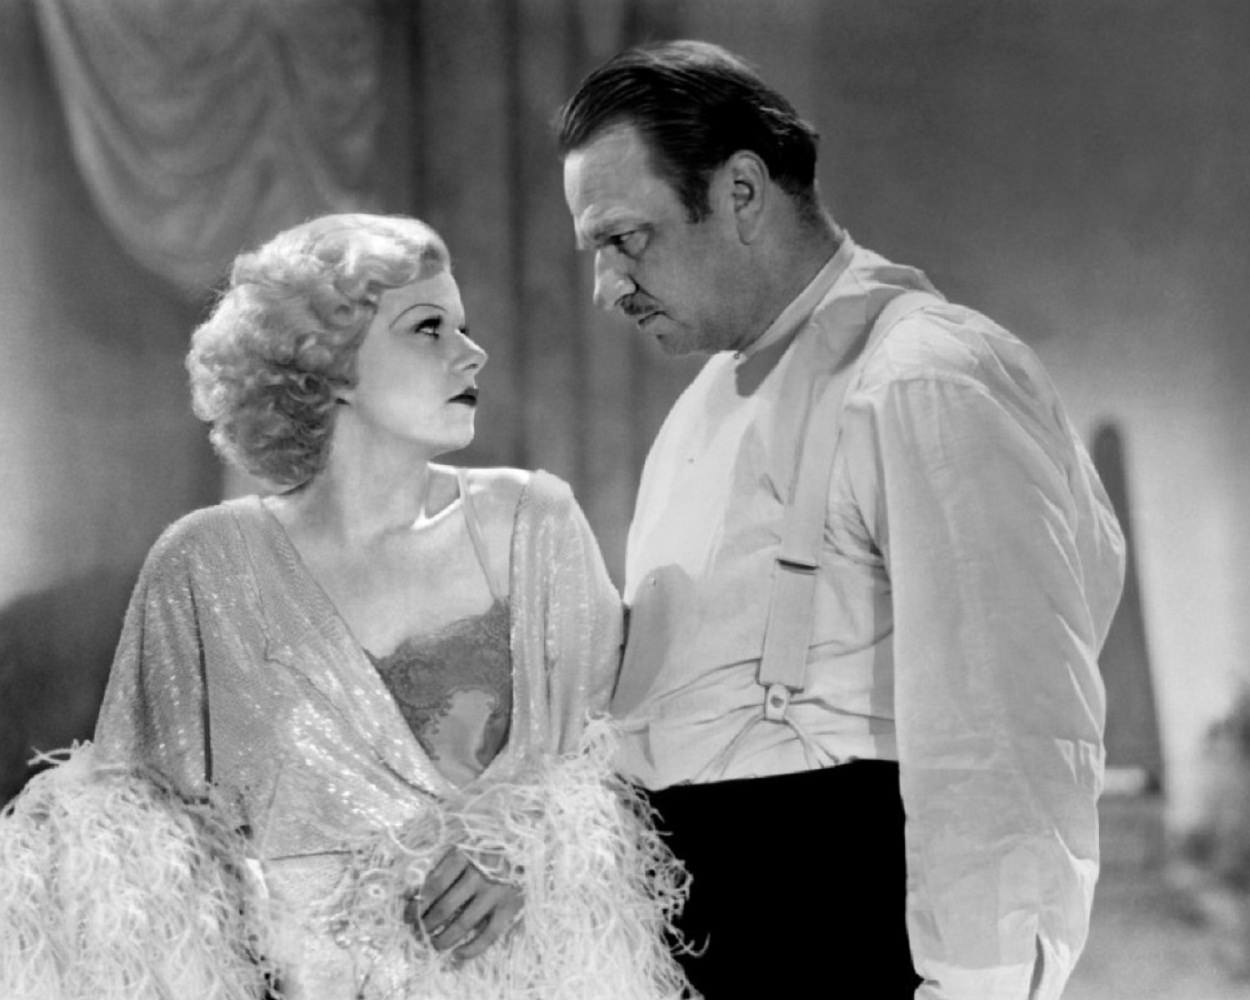 Jean Harlow and Wallace Beery in Dinner at eight, 1933